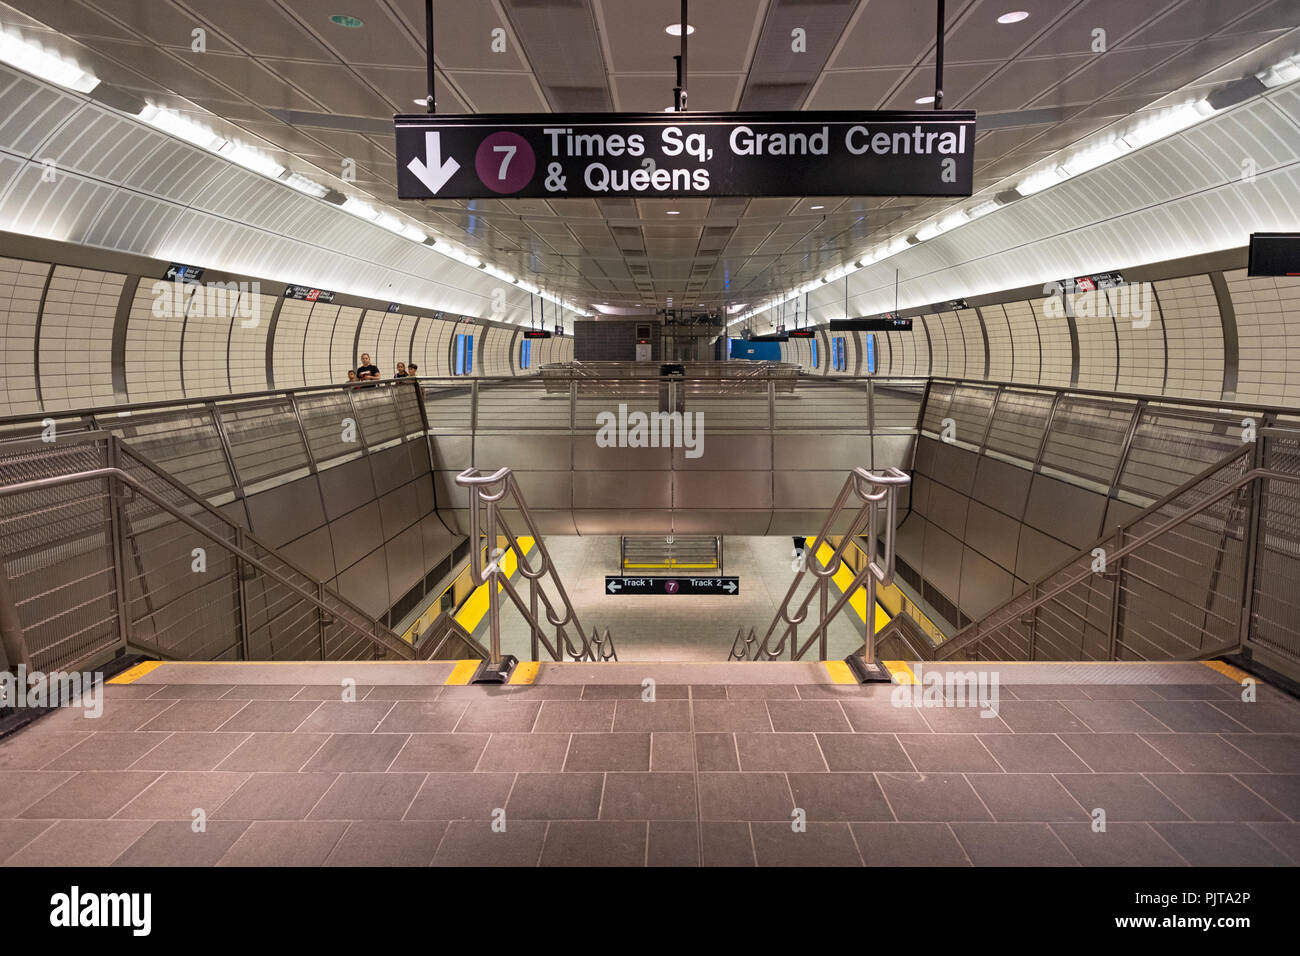 The mezzanine level of the Hudson Yards subway station on the number 7 line on the West side of Manhattan, New York City. Stock Photo